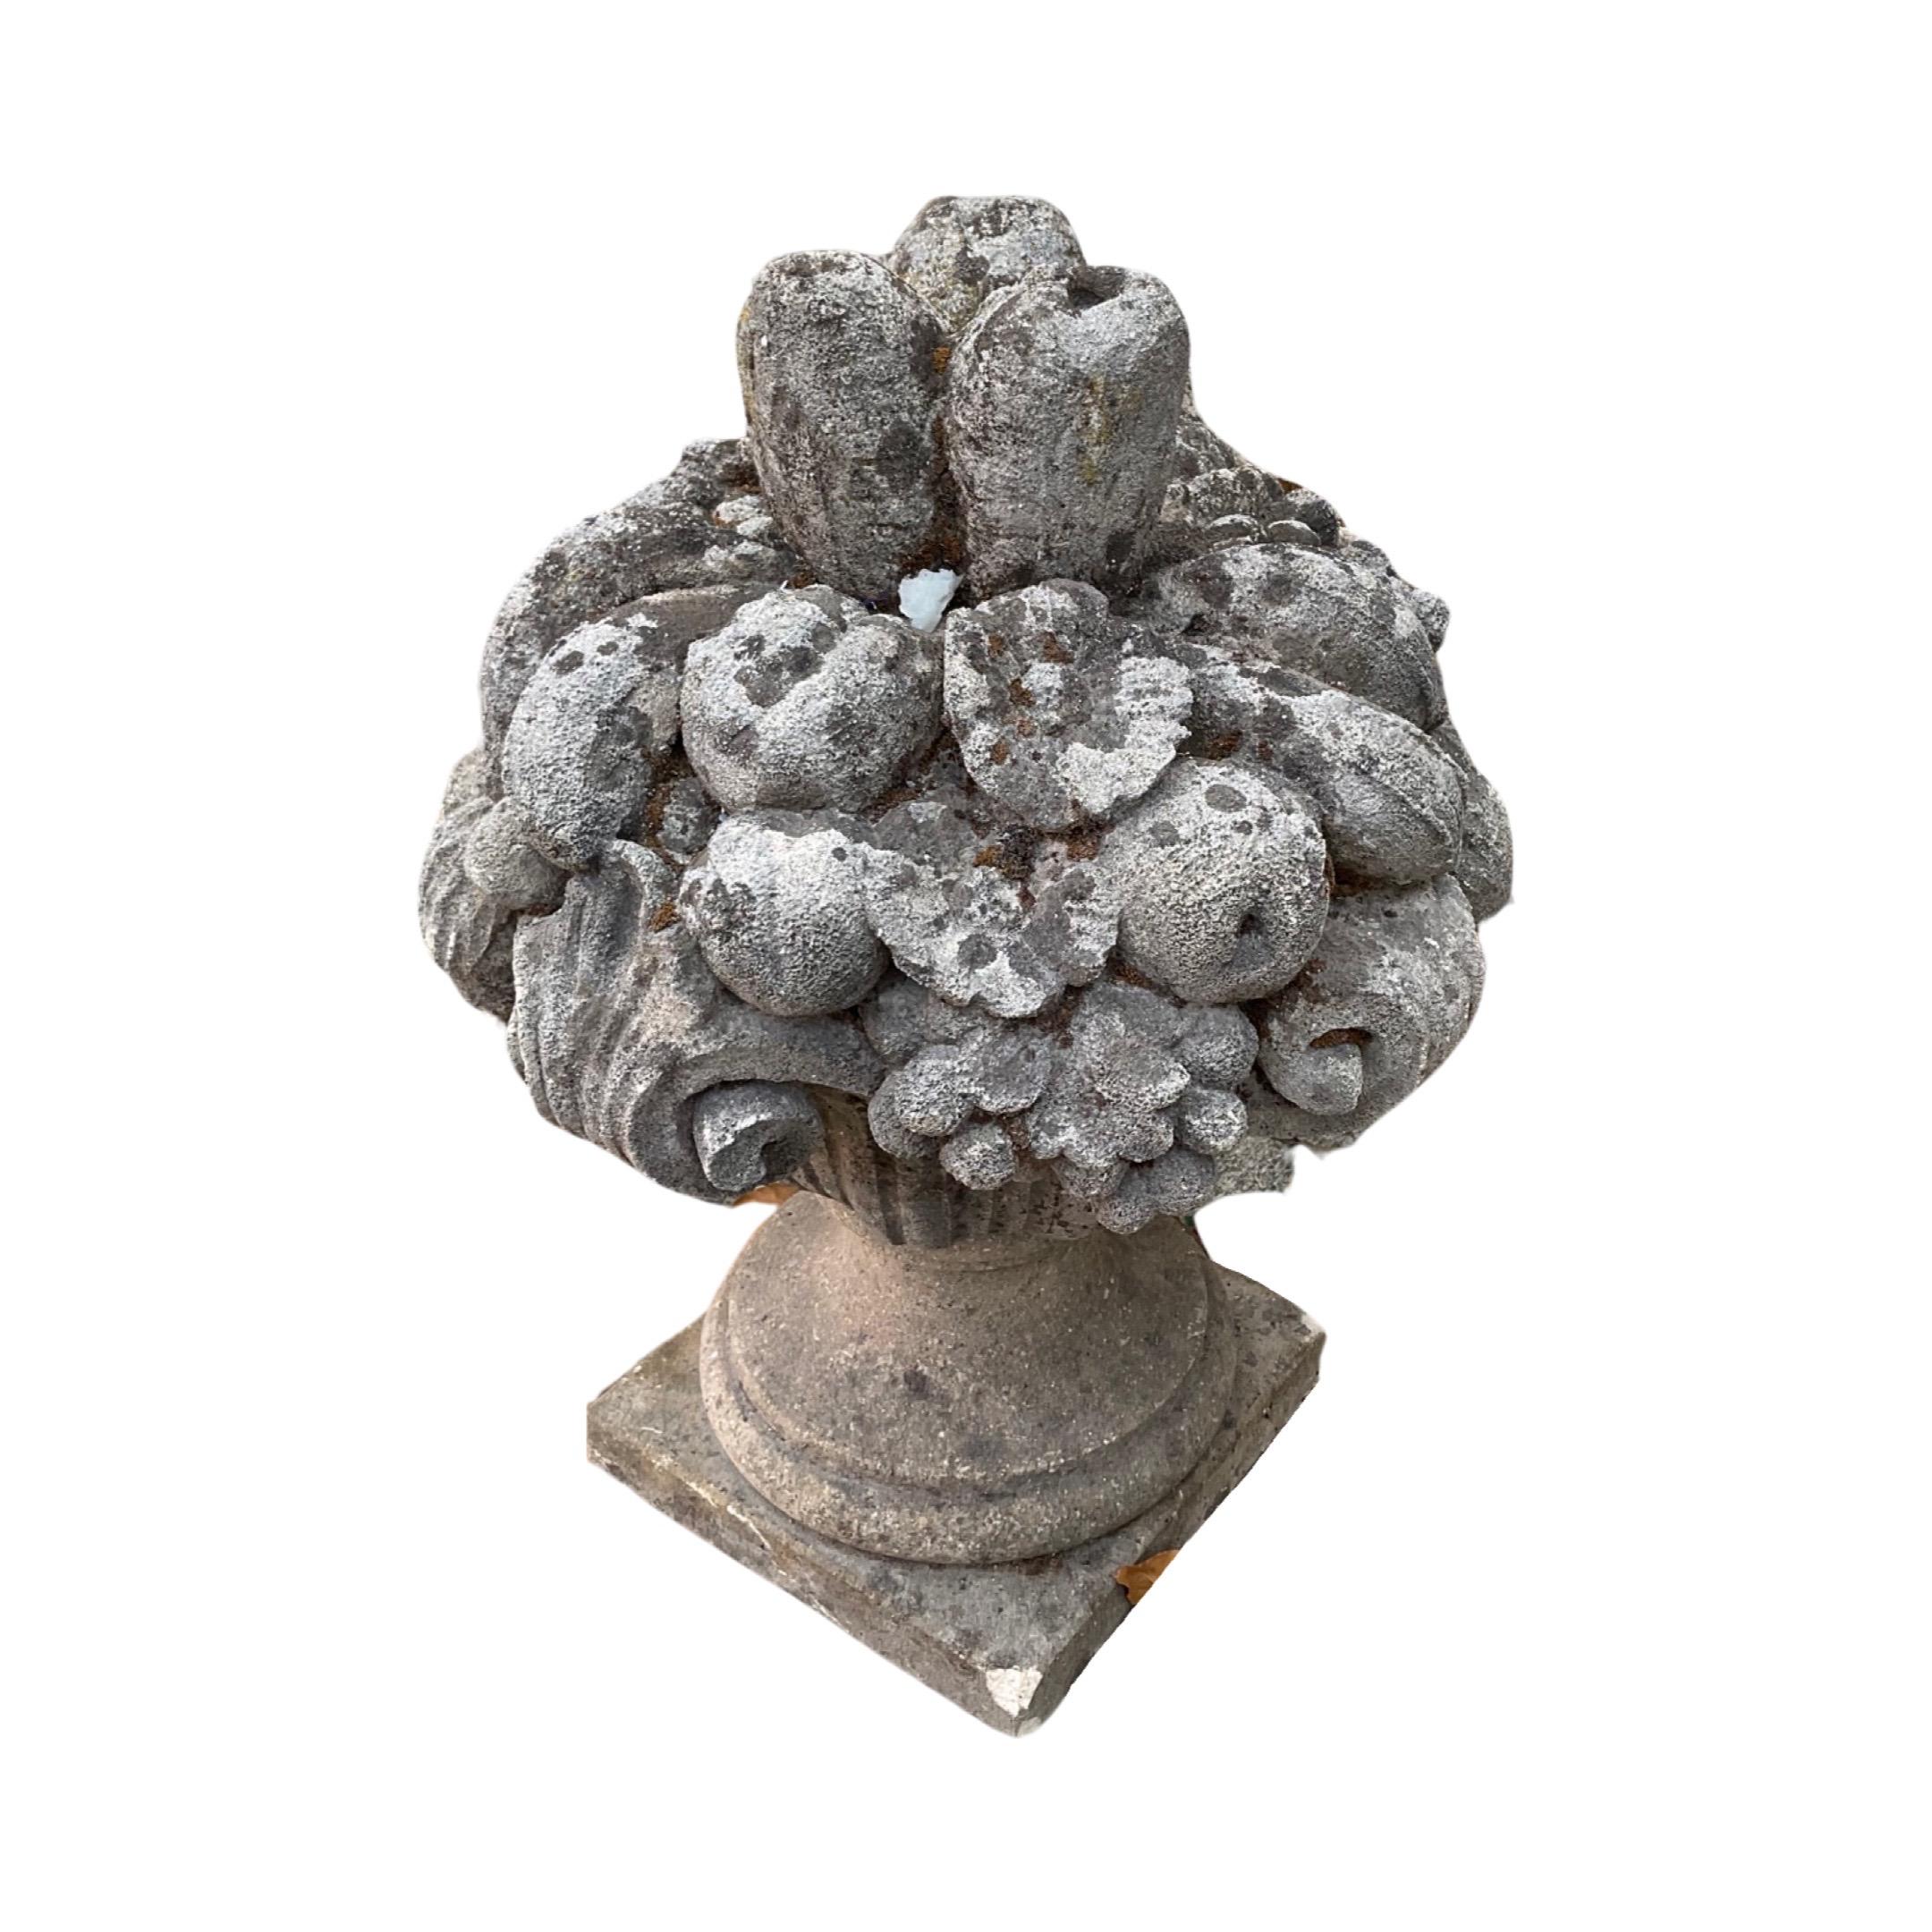 This timeless 18th century French Limestone Fruit Bouquet Sculpture is a classic decor element for a garden. Crafted from elegant limestone material, the sculpture features precise details and intricate silhouettes of a fruit bouquet. Add a touch of